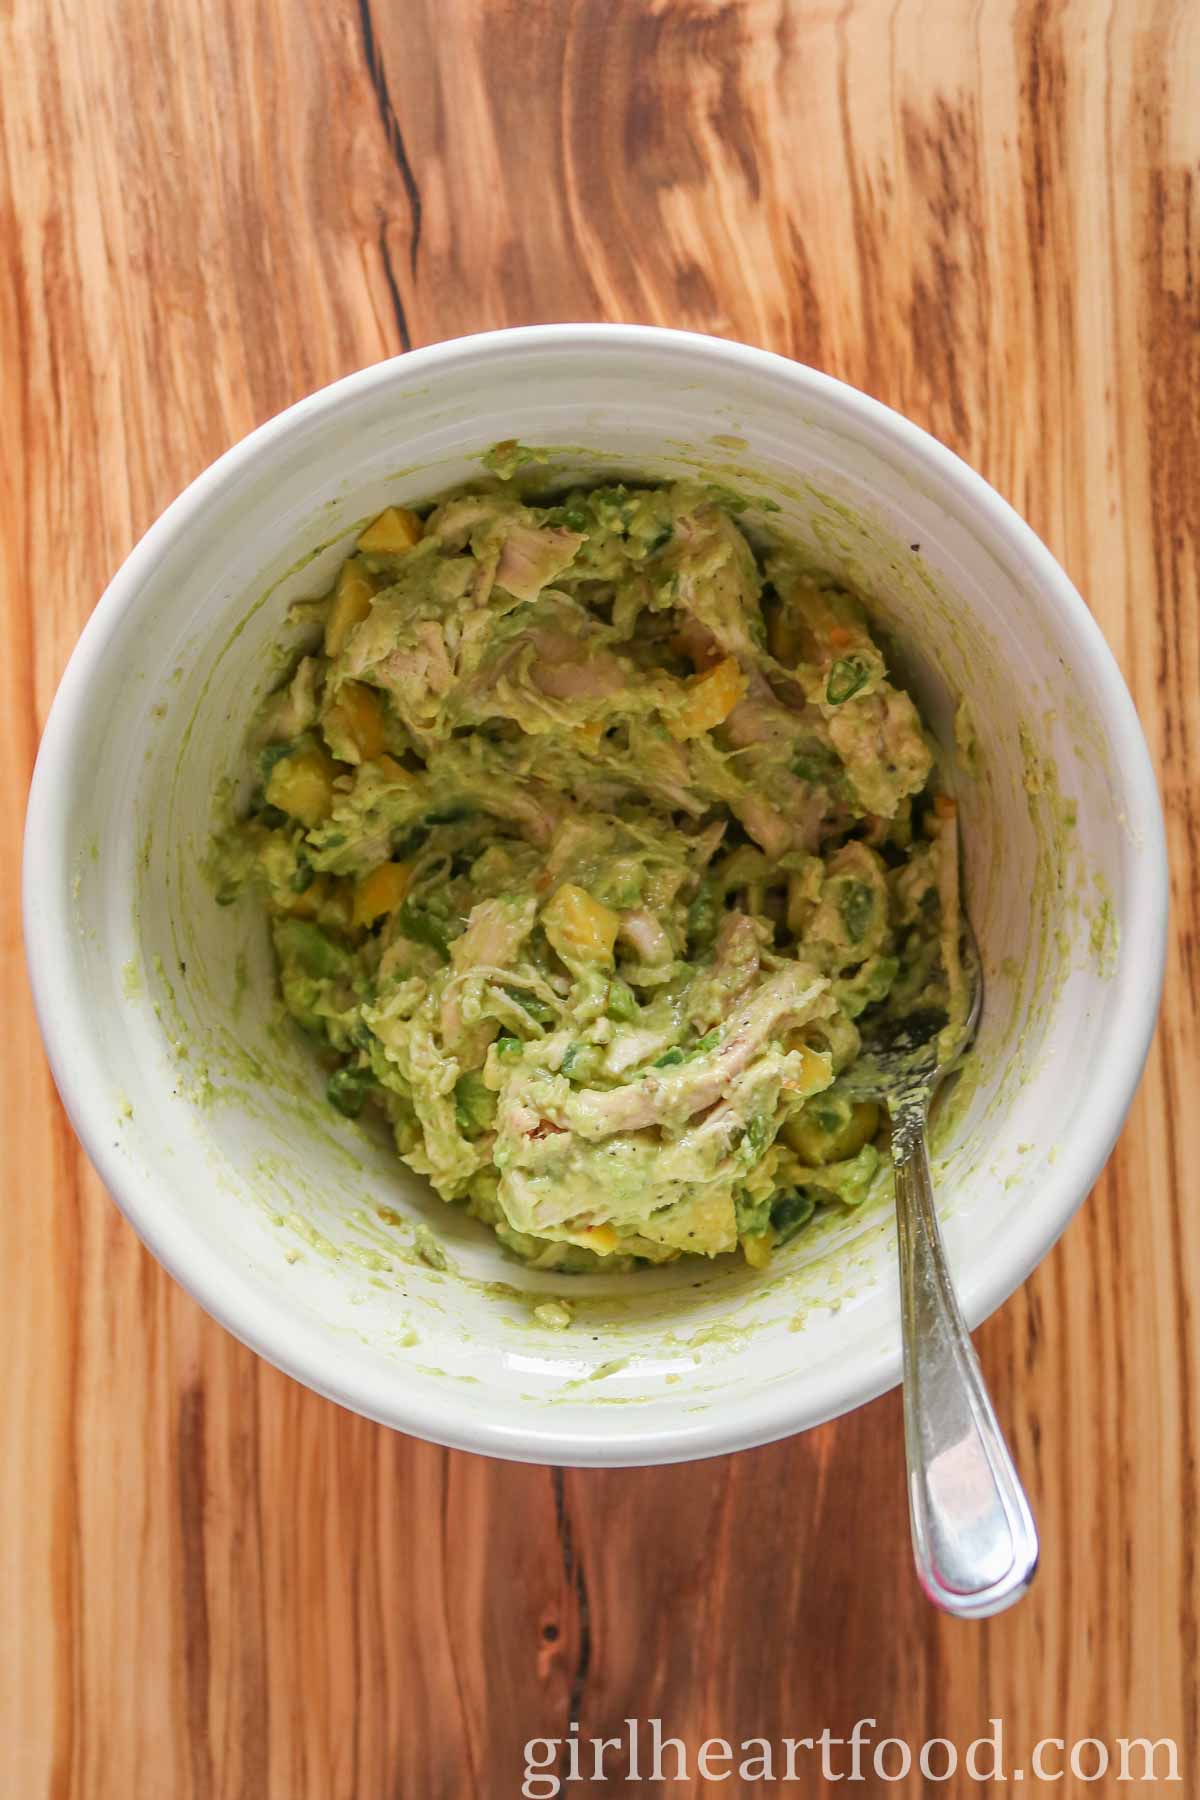 Chicken avocado salad mixture in a white bowl with a spoon resting in the mixture.